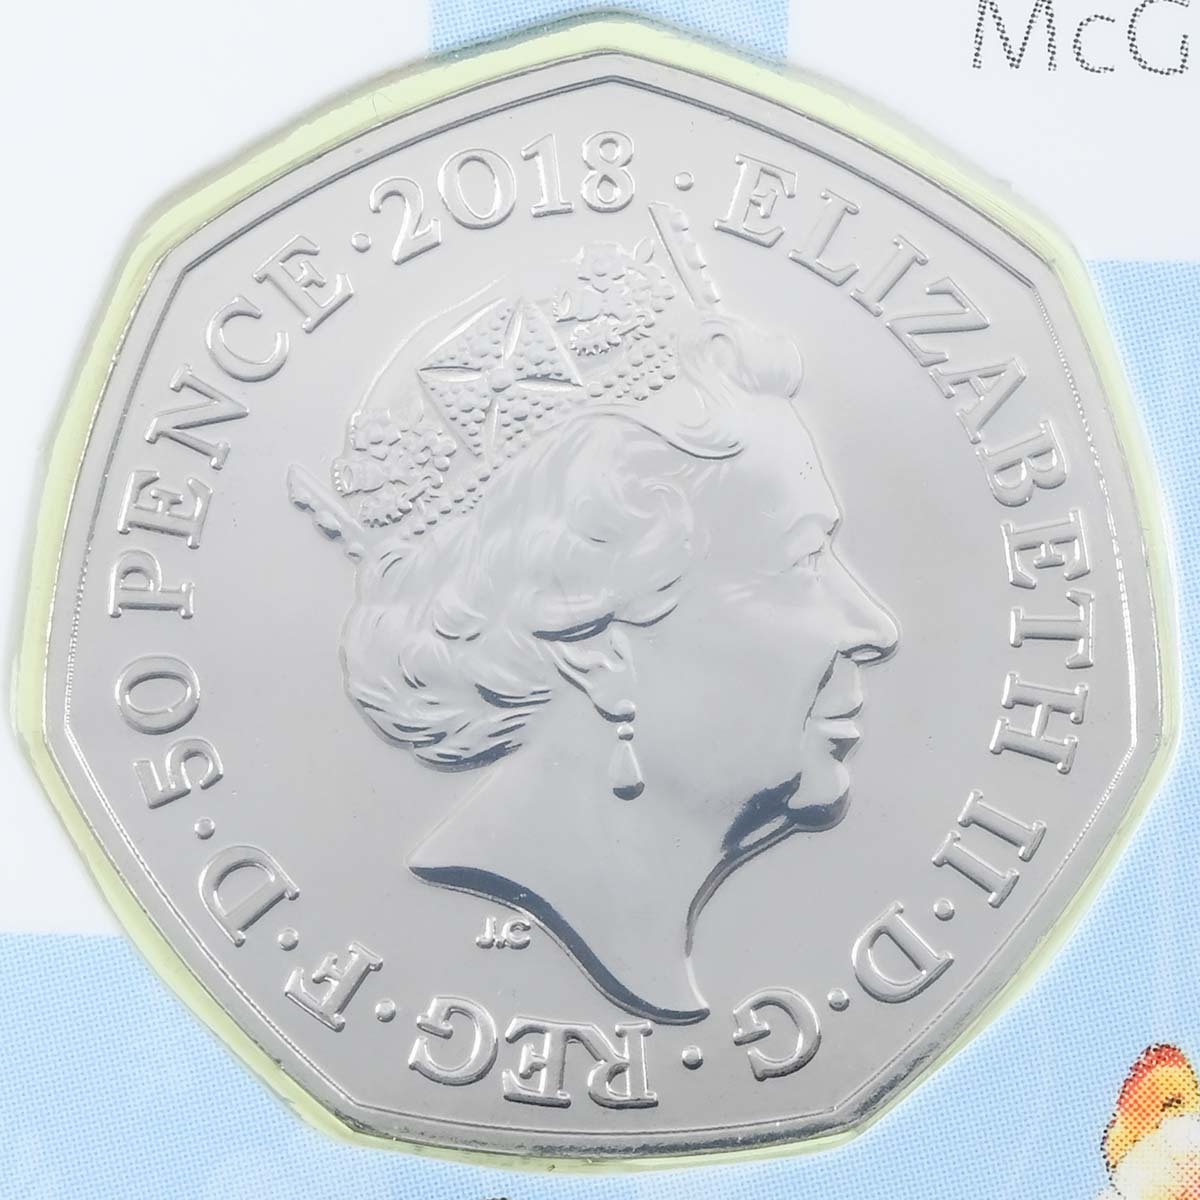 UK18PRBU 2018 Beatrix Potter Peter Rabbit Fifty Pence Brilliant Uncirculated Coin In Folder Obverse